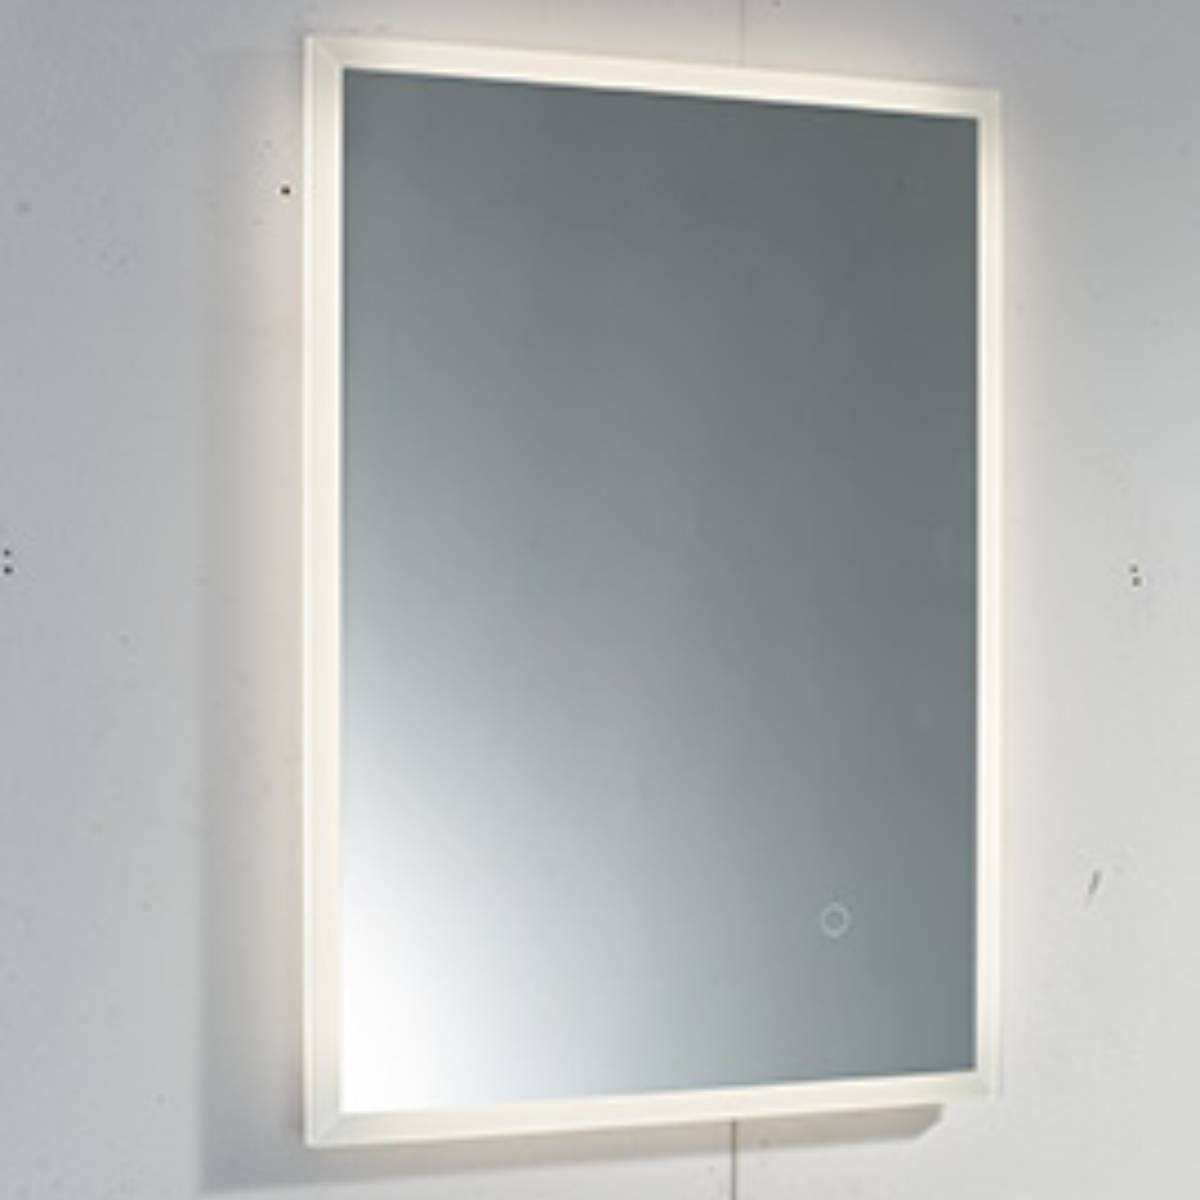 Clear Look Avening 800 x 600mm LED Mirror (12083)